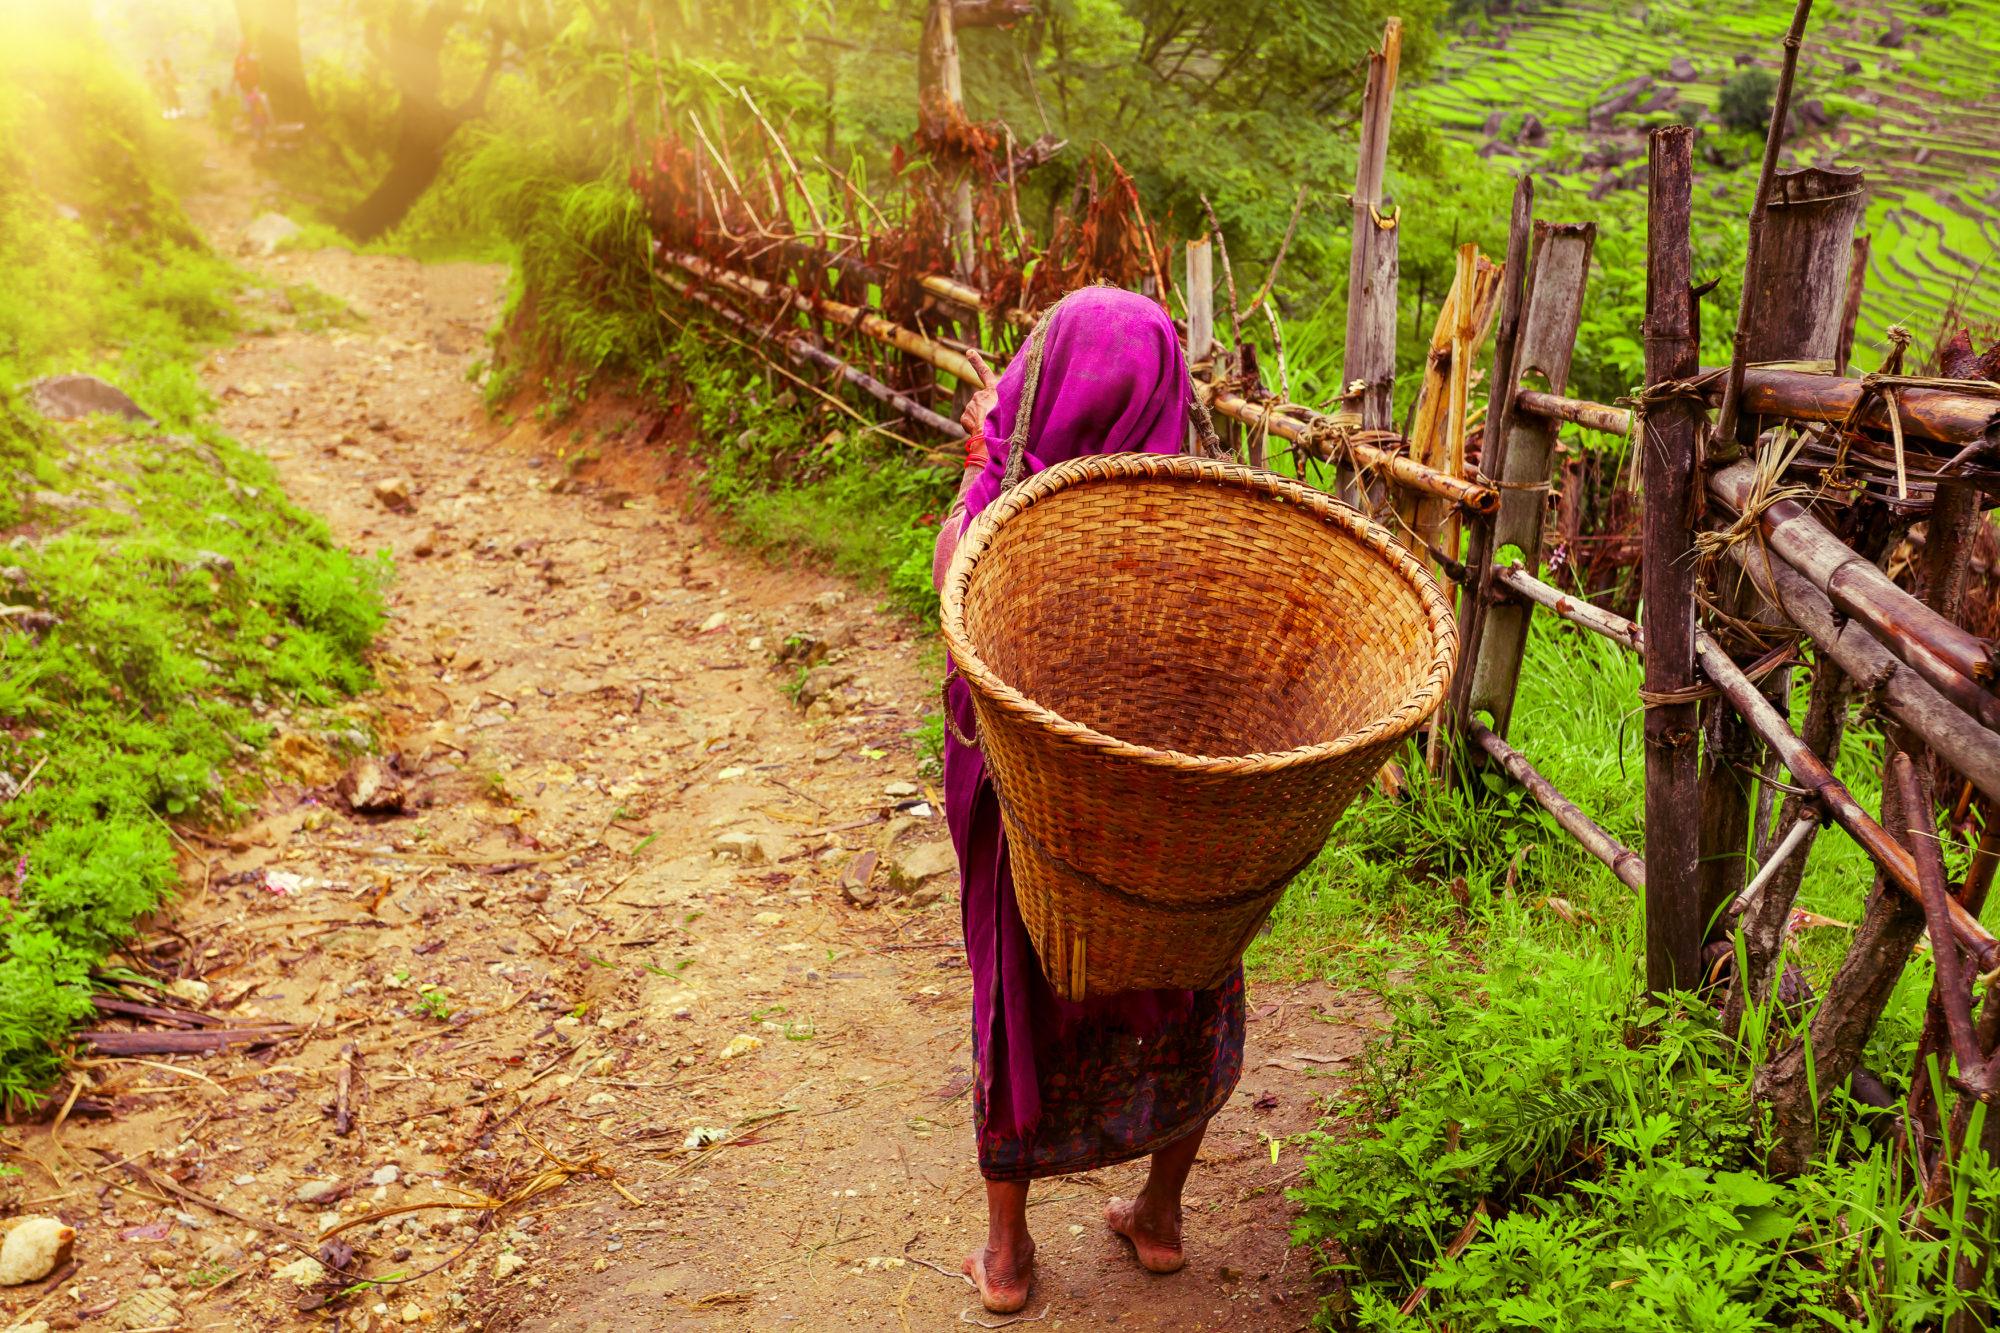 Nepalese woman with Wicker Basket on rural road in Nepal. Foto: Colourbox